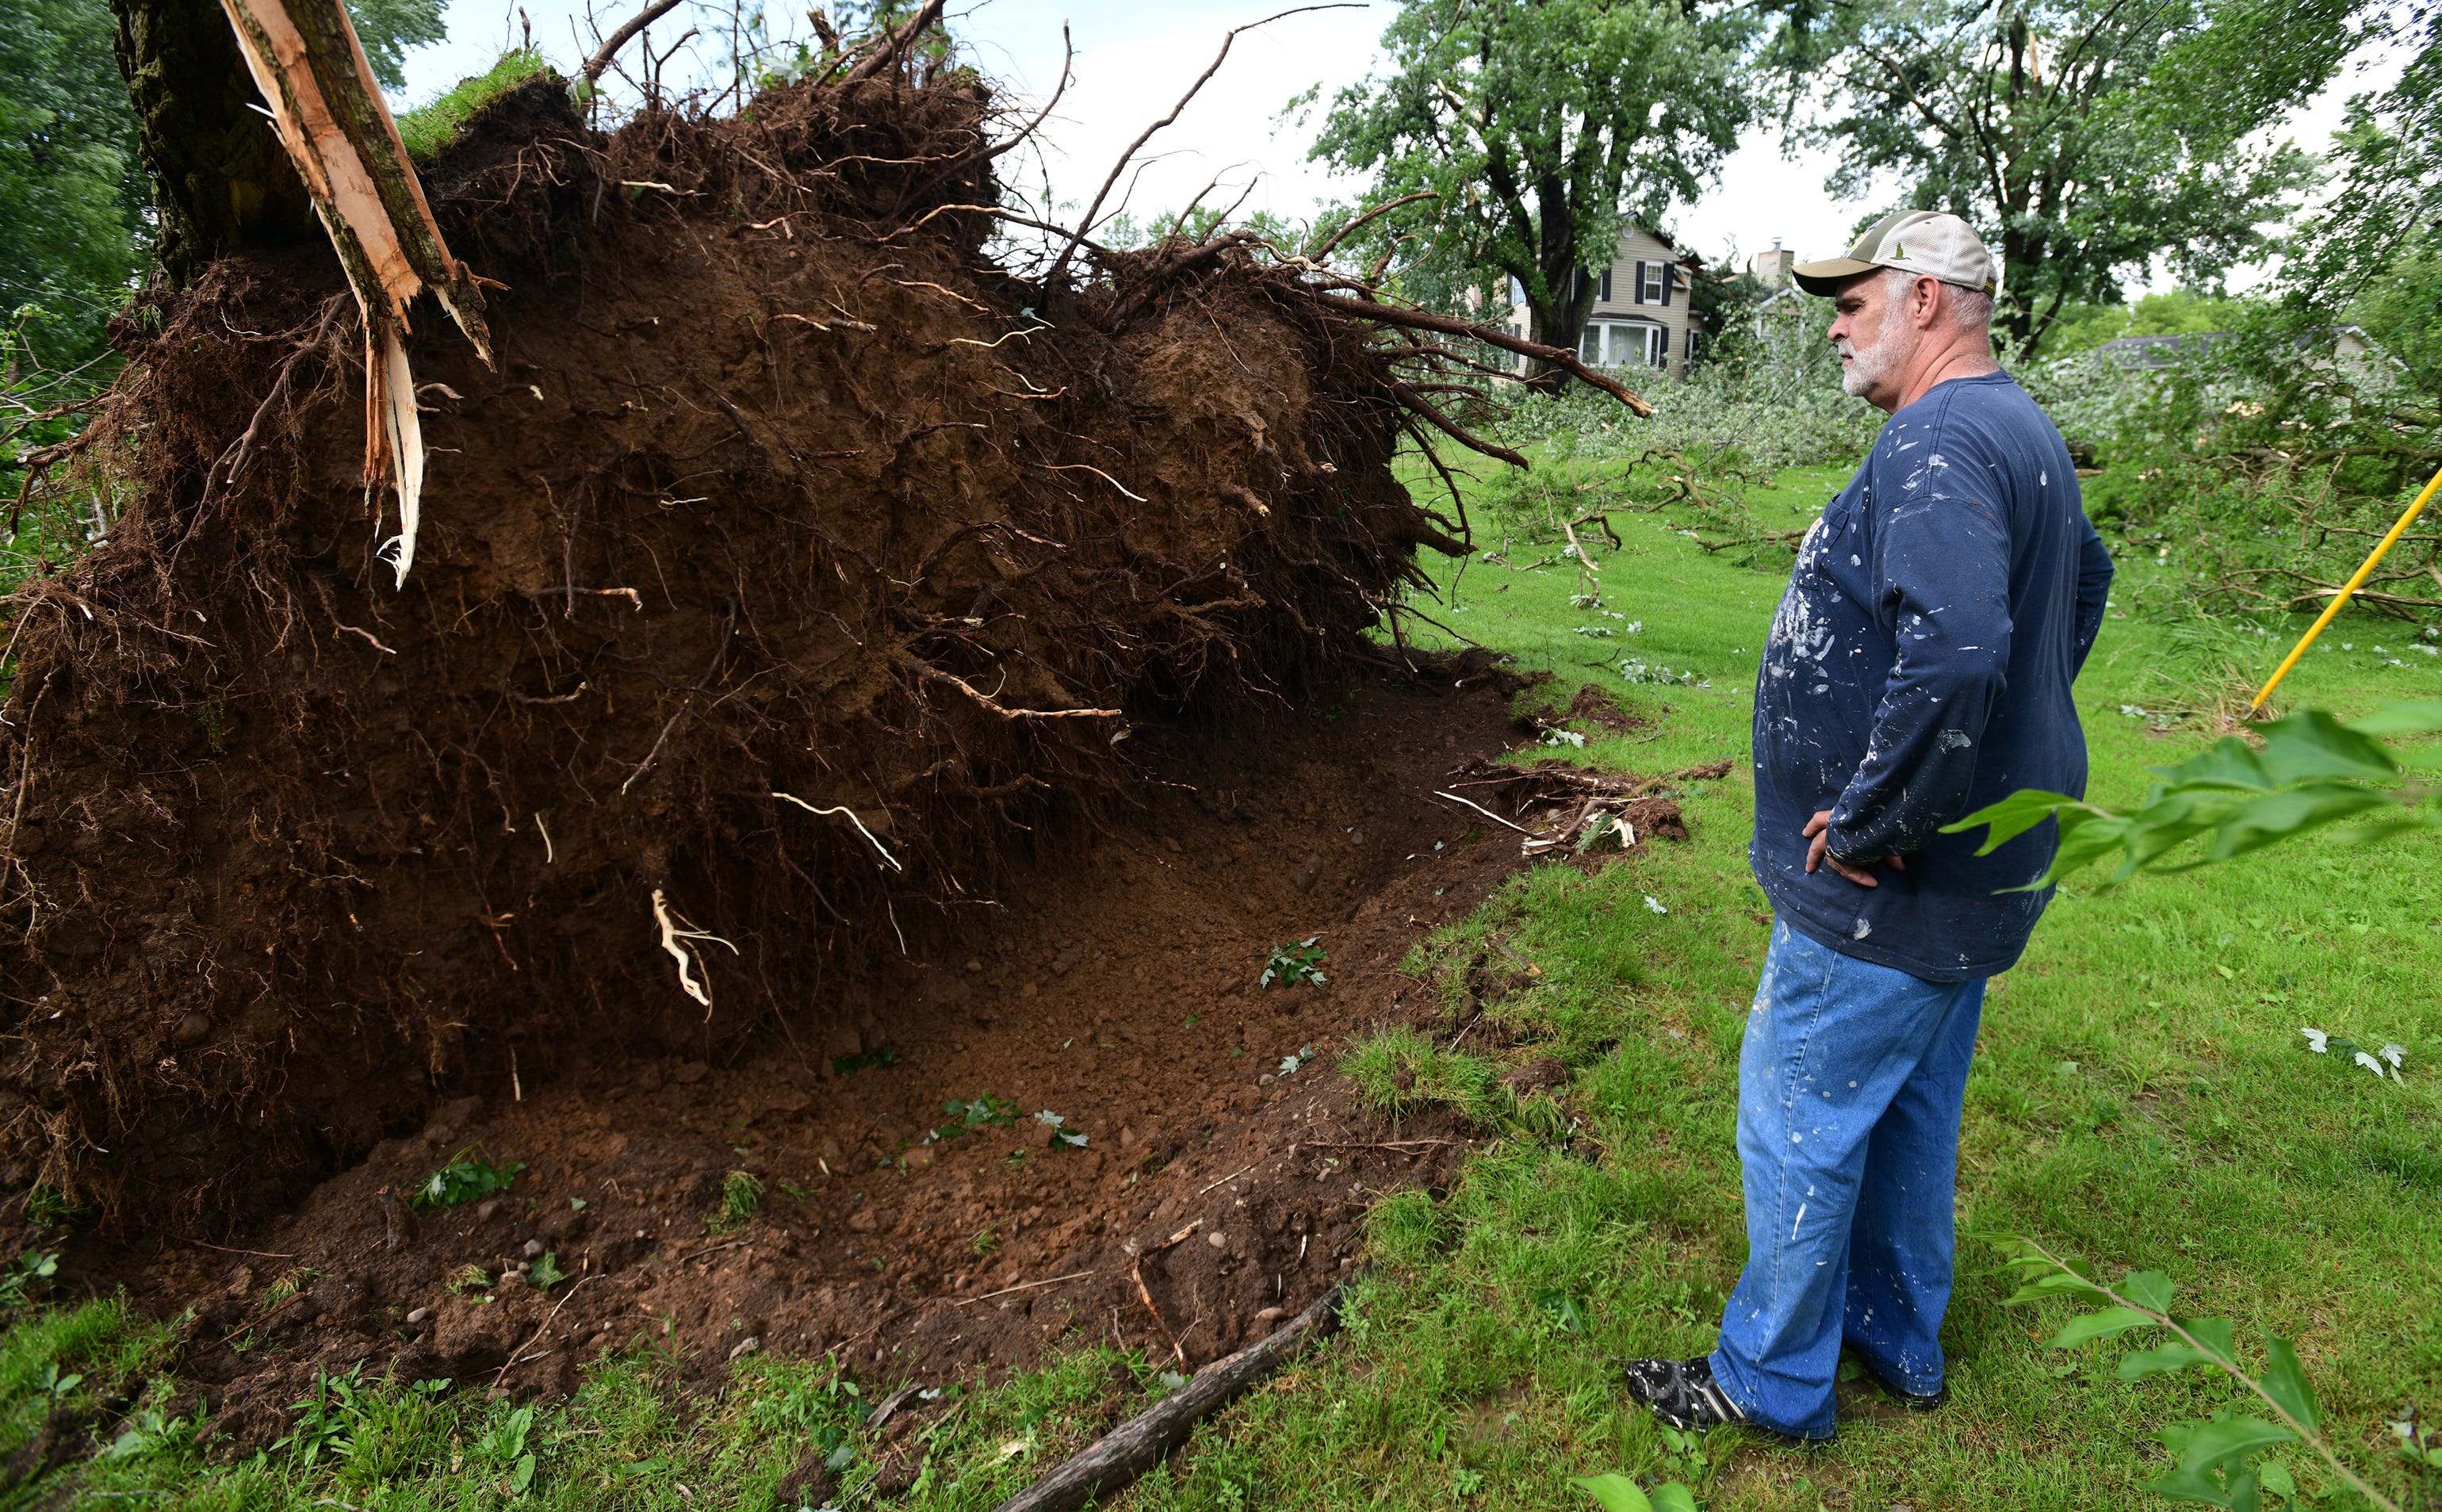 Tim Hinkle stands near the root ball of a downed tree on his property on King Road near Riegle Road on Wednesday, June 10, 2020. Strong storms with heavy winds swept across Jackson County, Mich., causing power outages, downing trees and damaging property. Hinkle had about a dozen trees either completely toppled or with limbs sent flying. His home also sustained damage.  (J. Scott Park/Jackson Citizen Patriot via AP)